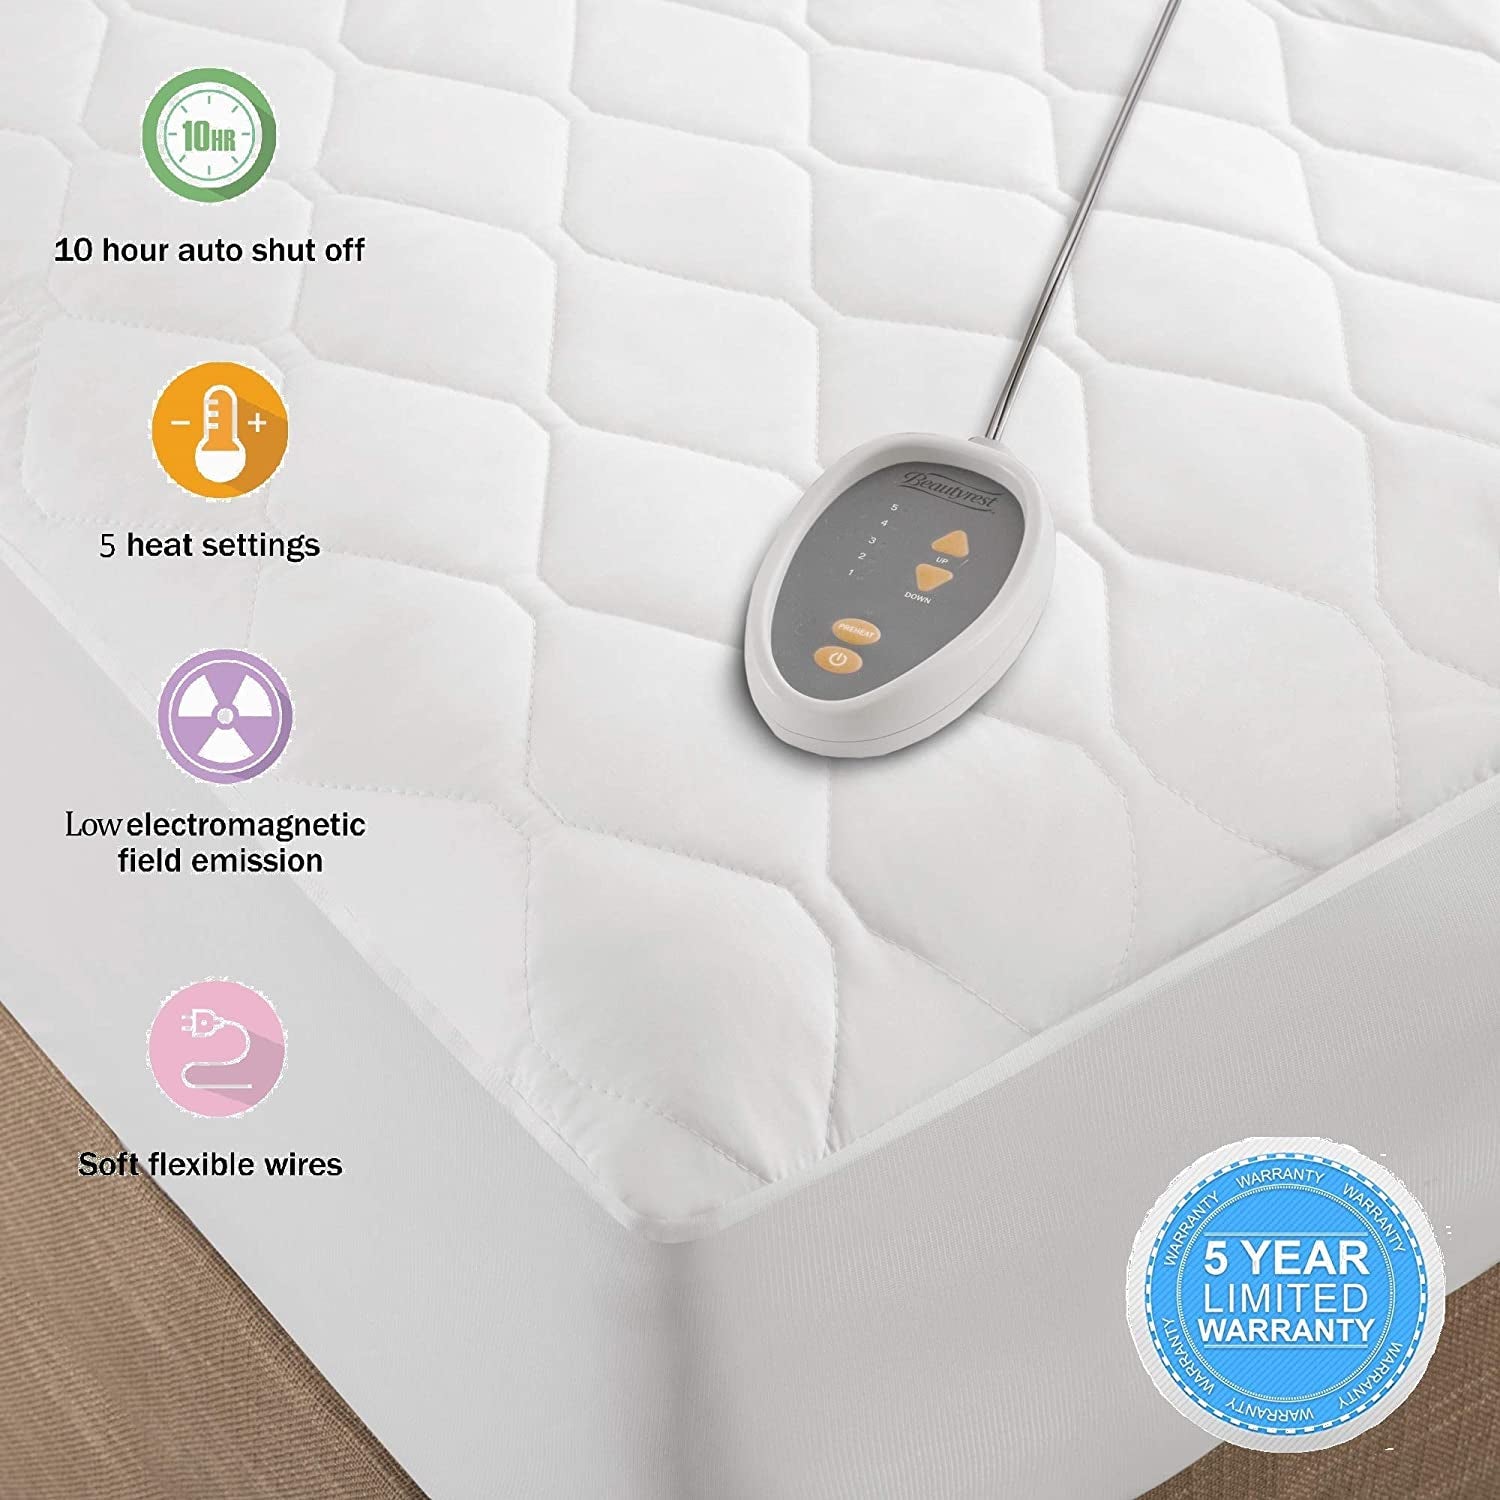 Beautyrest 3M Scotchgard Heated Mattress Pad - Electric Bed Warmer with 5 Heat Settings, 10 Hr Auto Shut off Timer, All around Elastic Deep Pocket, UL Certified, Machine Washable, White Twin XL